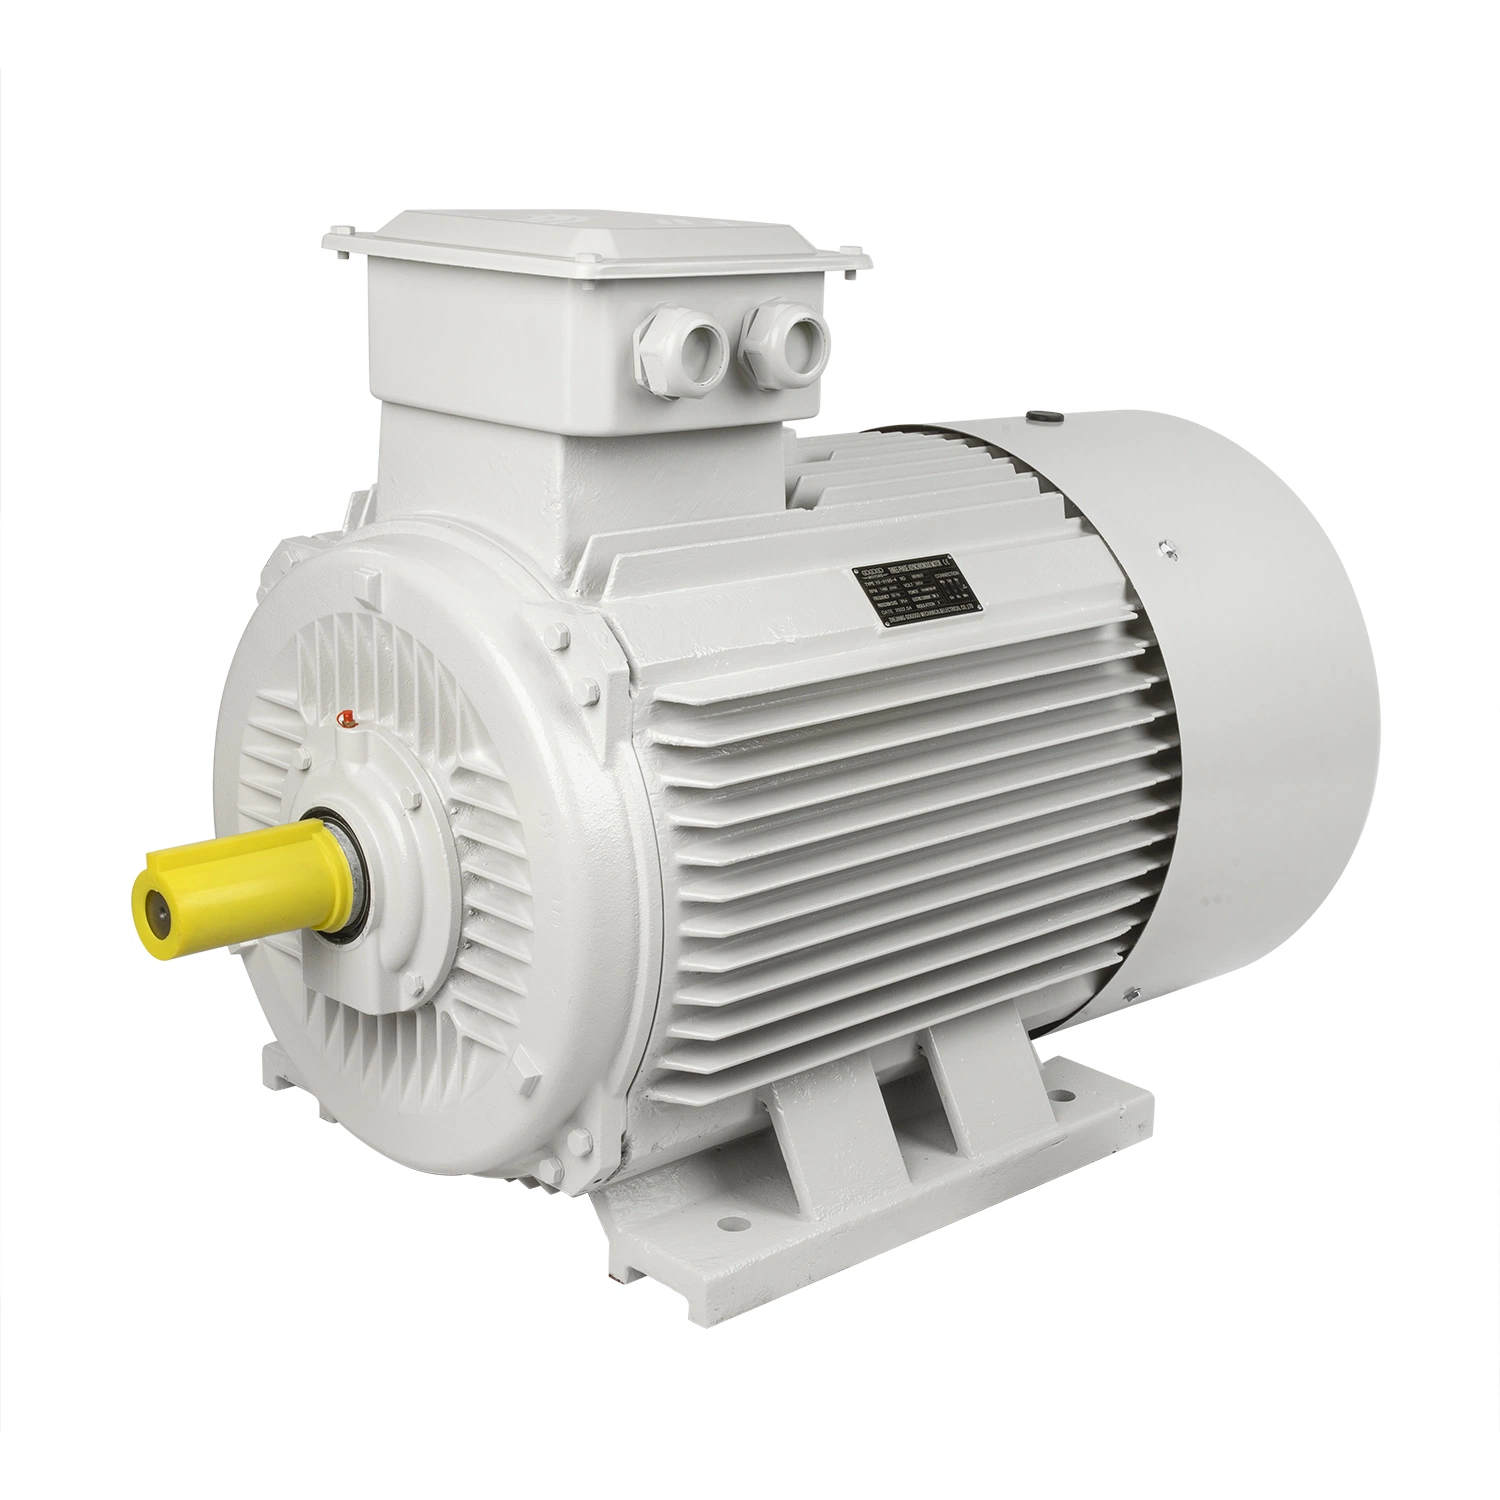 Chinese Ie2 Ie3 Ye2 Ye3 Yb3 Ybx3 Y2 Y Ms Yc Yl Ml Yy Premium High Efficient AC Induction Asynchronous Three Phase Explosion-Proof Flame Proof Electric Motor